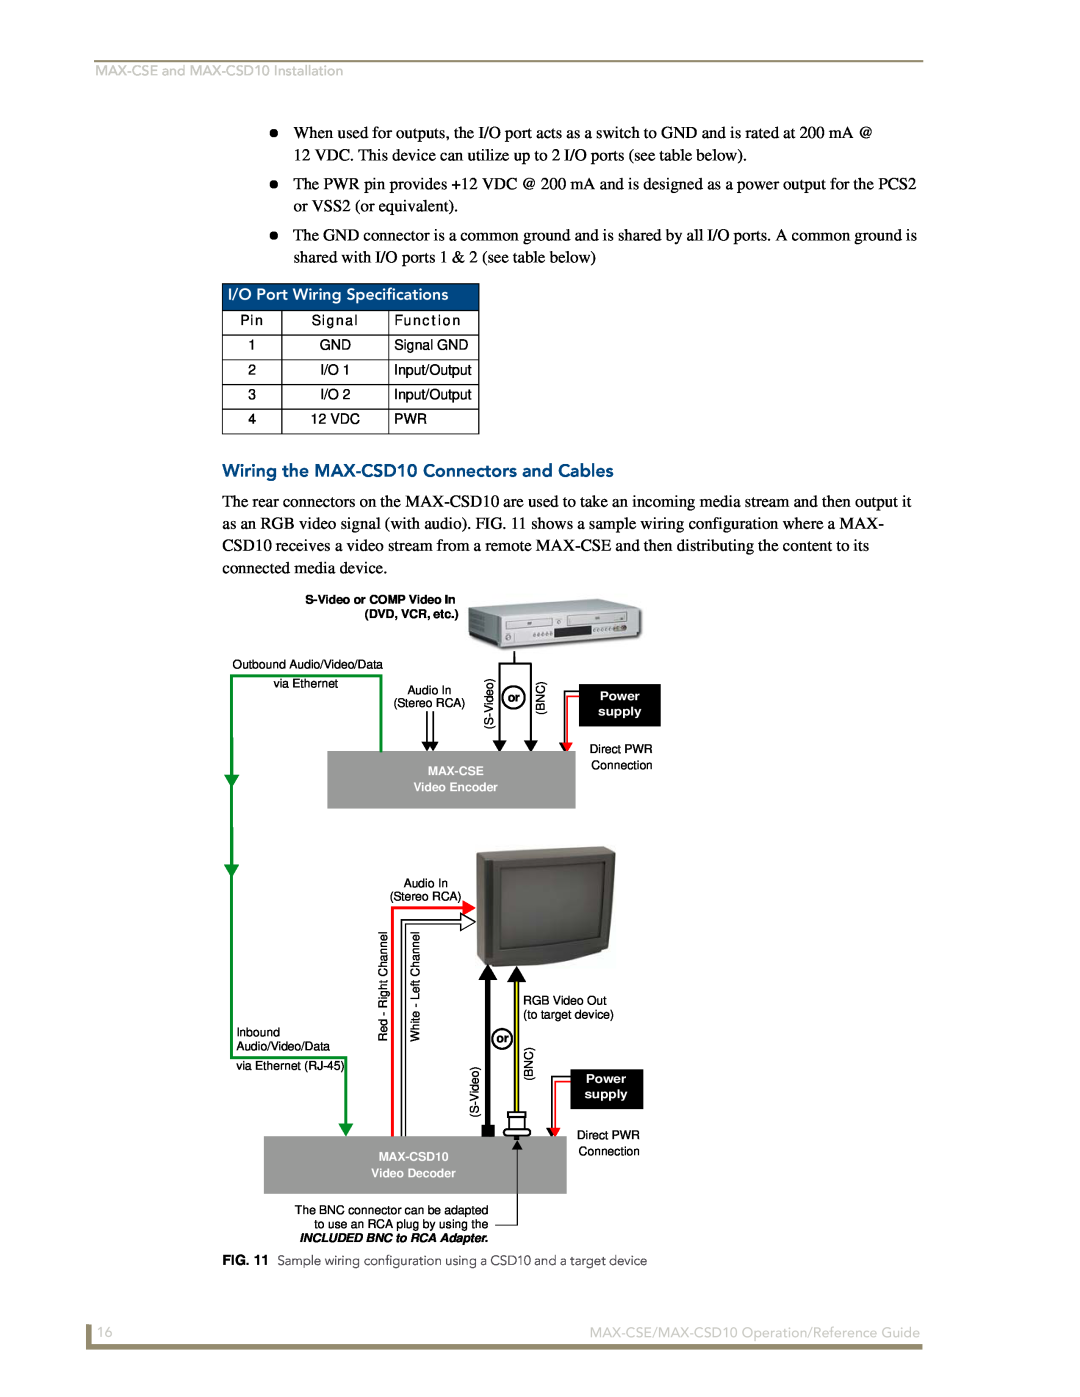 AMX MAX-CSE manual Wiring the MAX-CSD10Connectors and Cables, I/O Port Wiring Specifications 